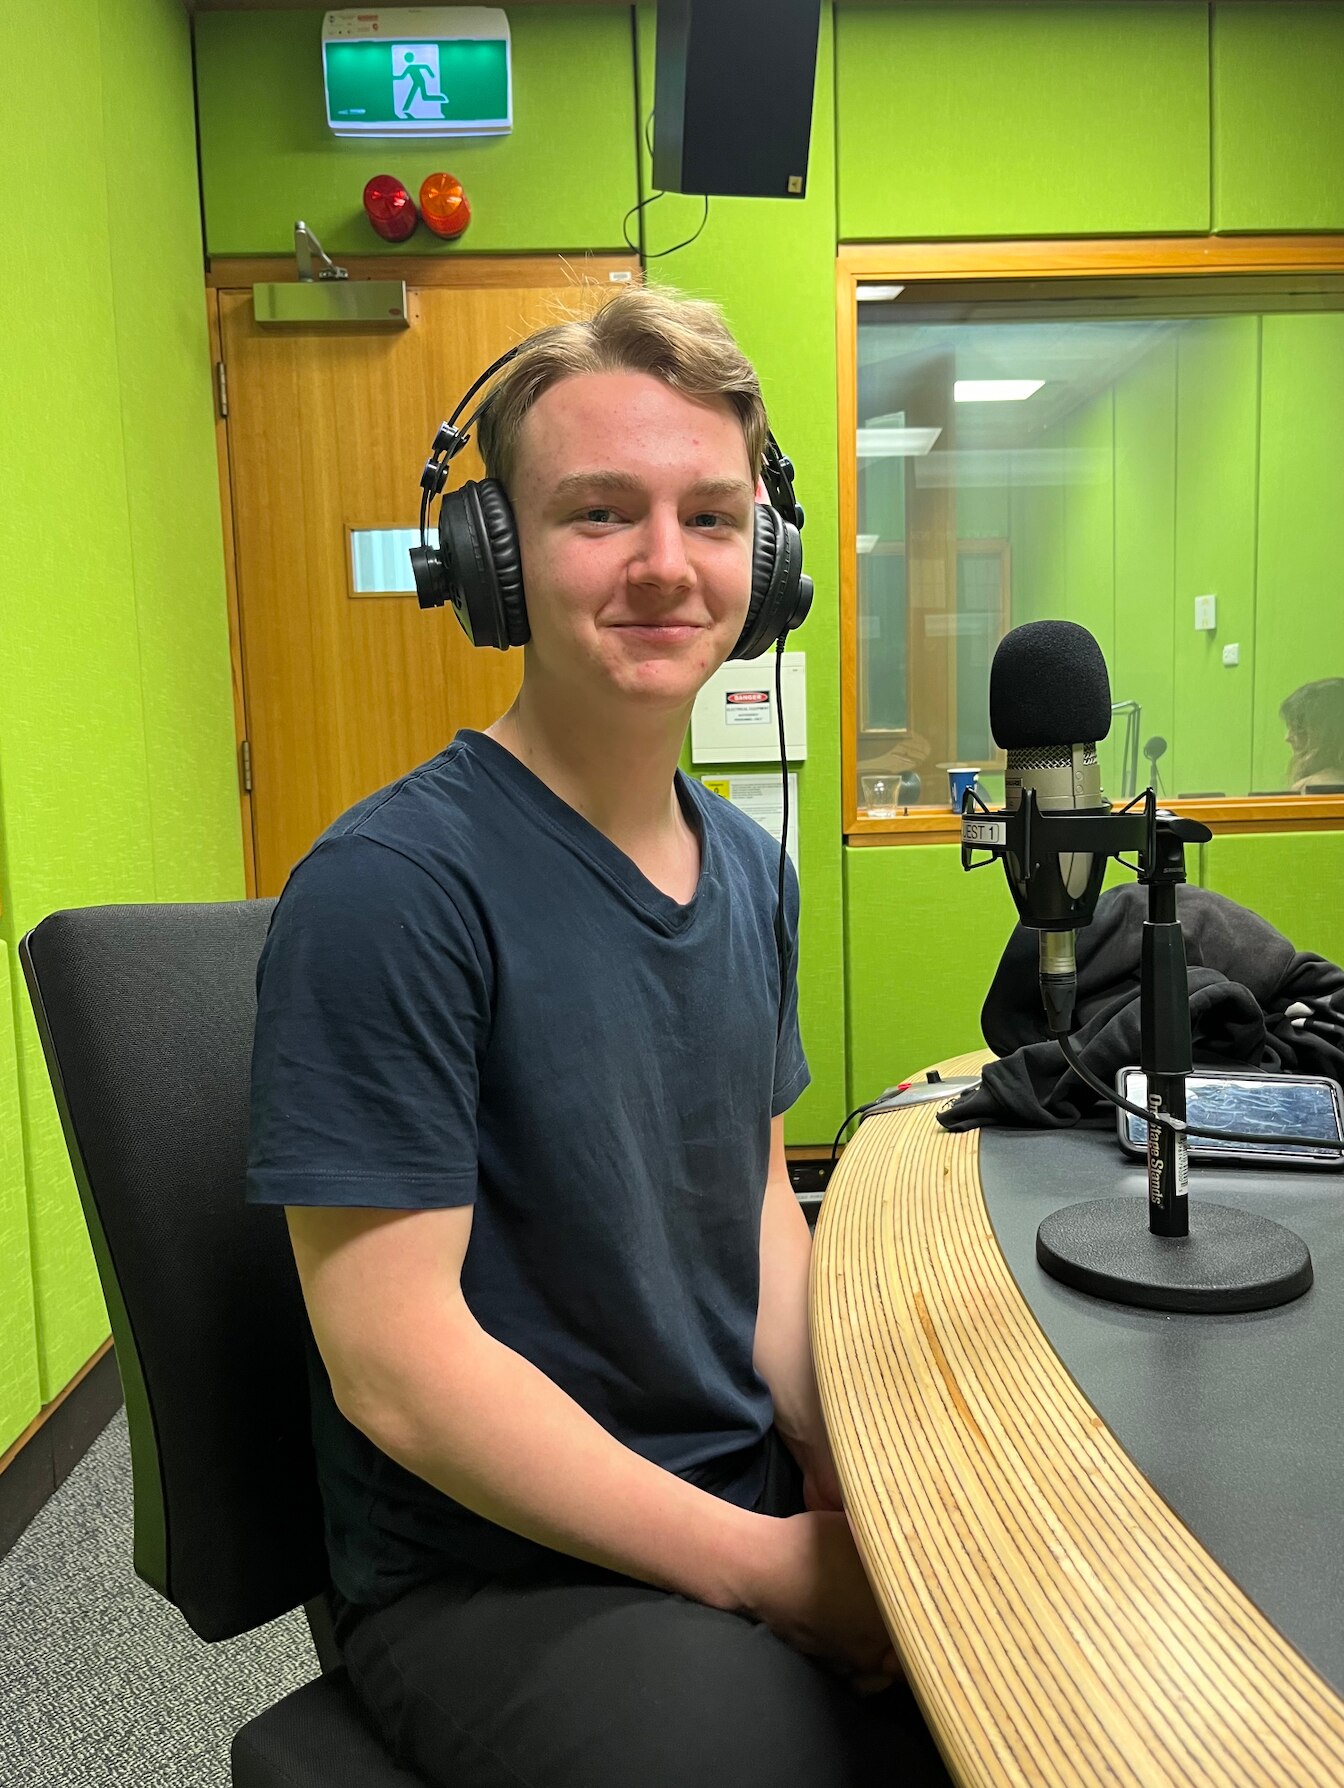 A young man sits in a radio studio with headphones on, smiling at the camera.